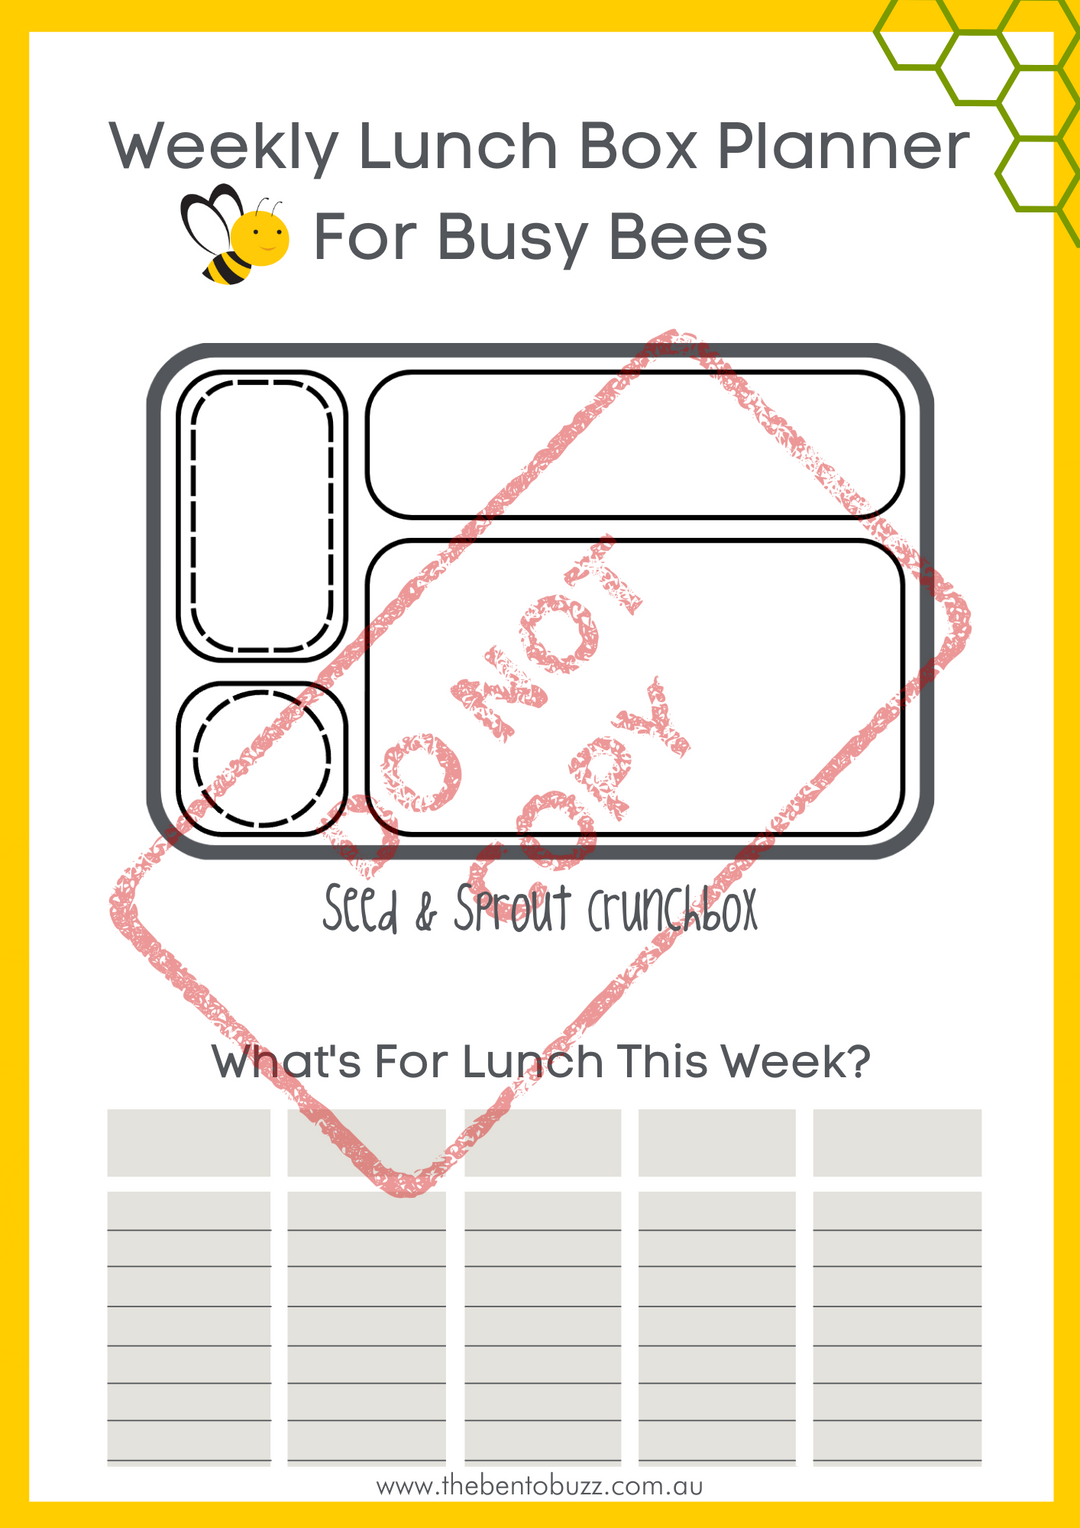 Download & Print Lunch Box Planner - Seed & Sprout Crunchbox